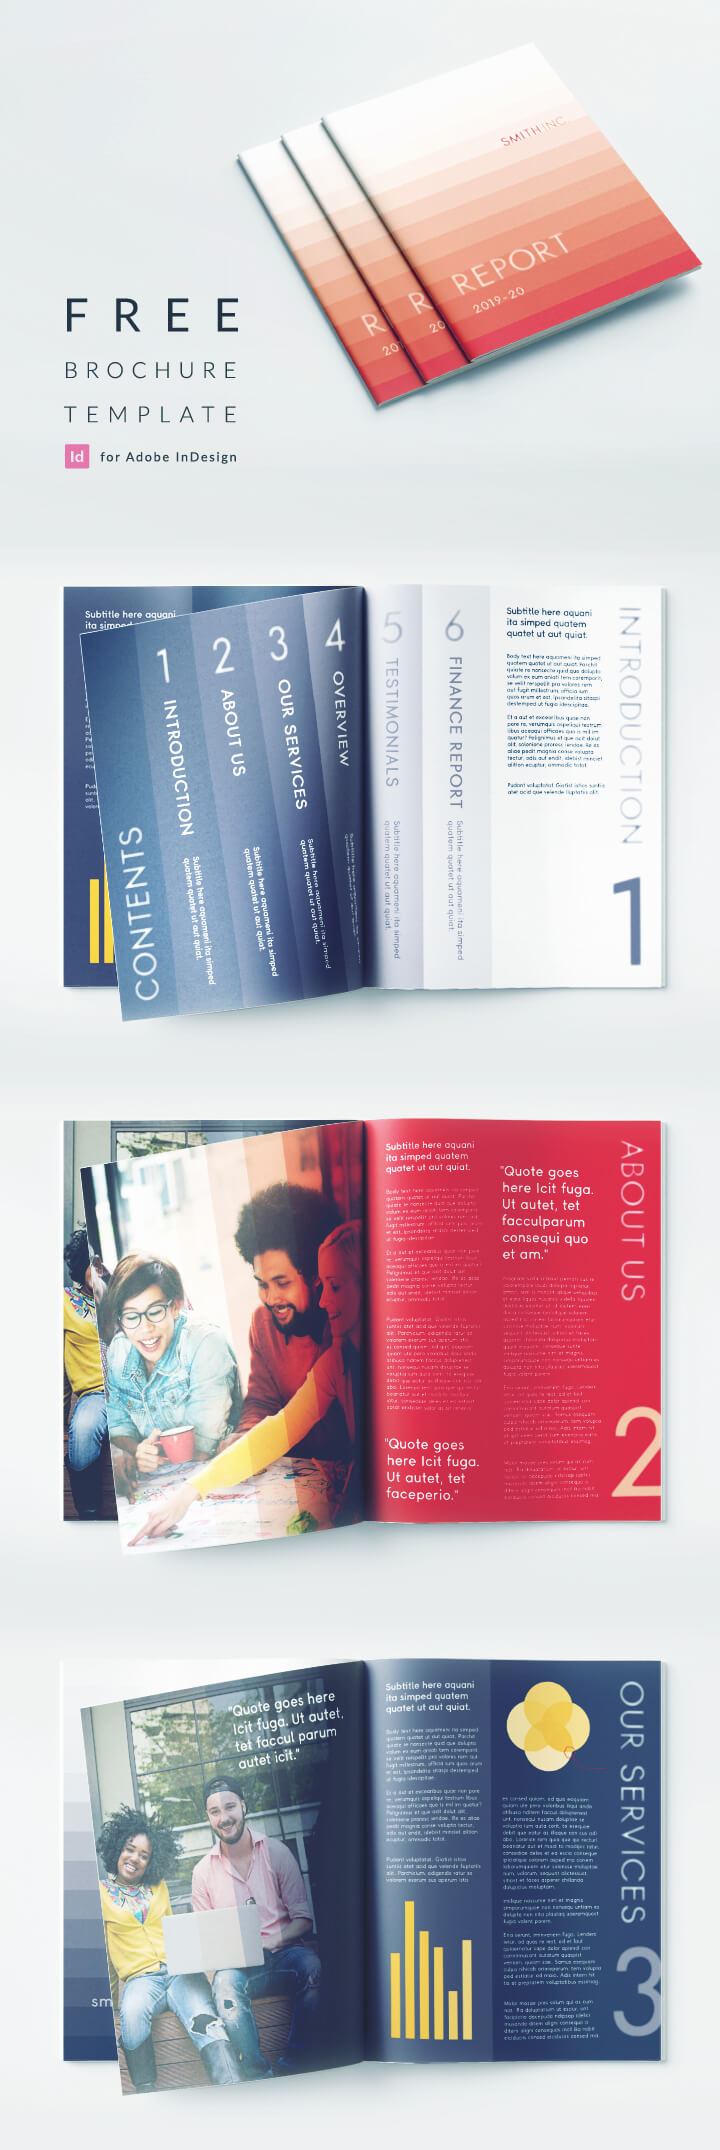 Elegant Corporate Brochure Or Report Indesign Template Intended For Free Indesign Report Templates